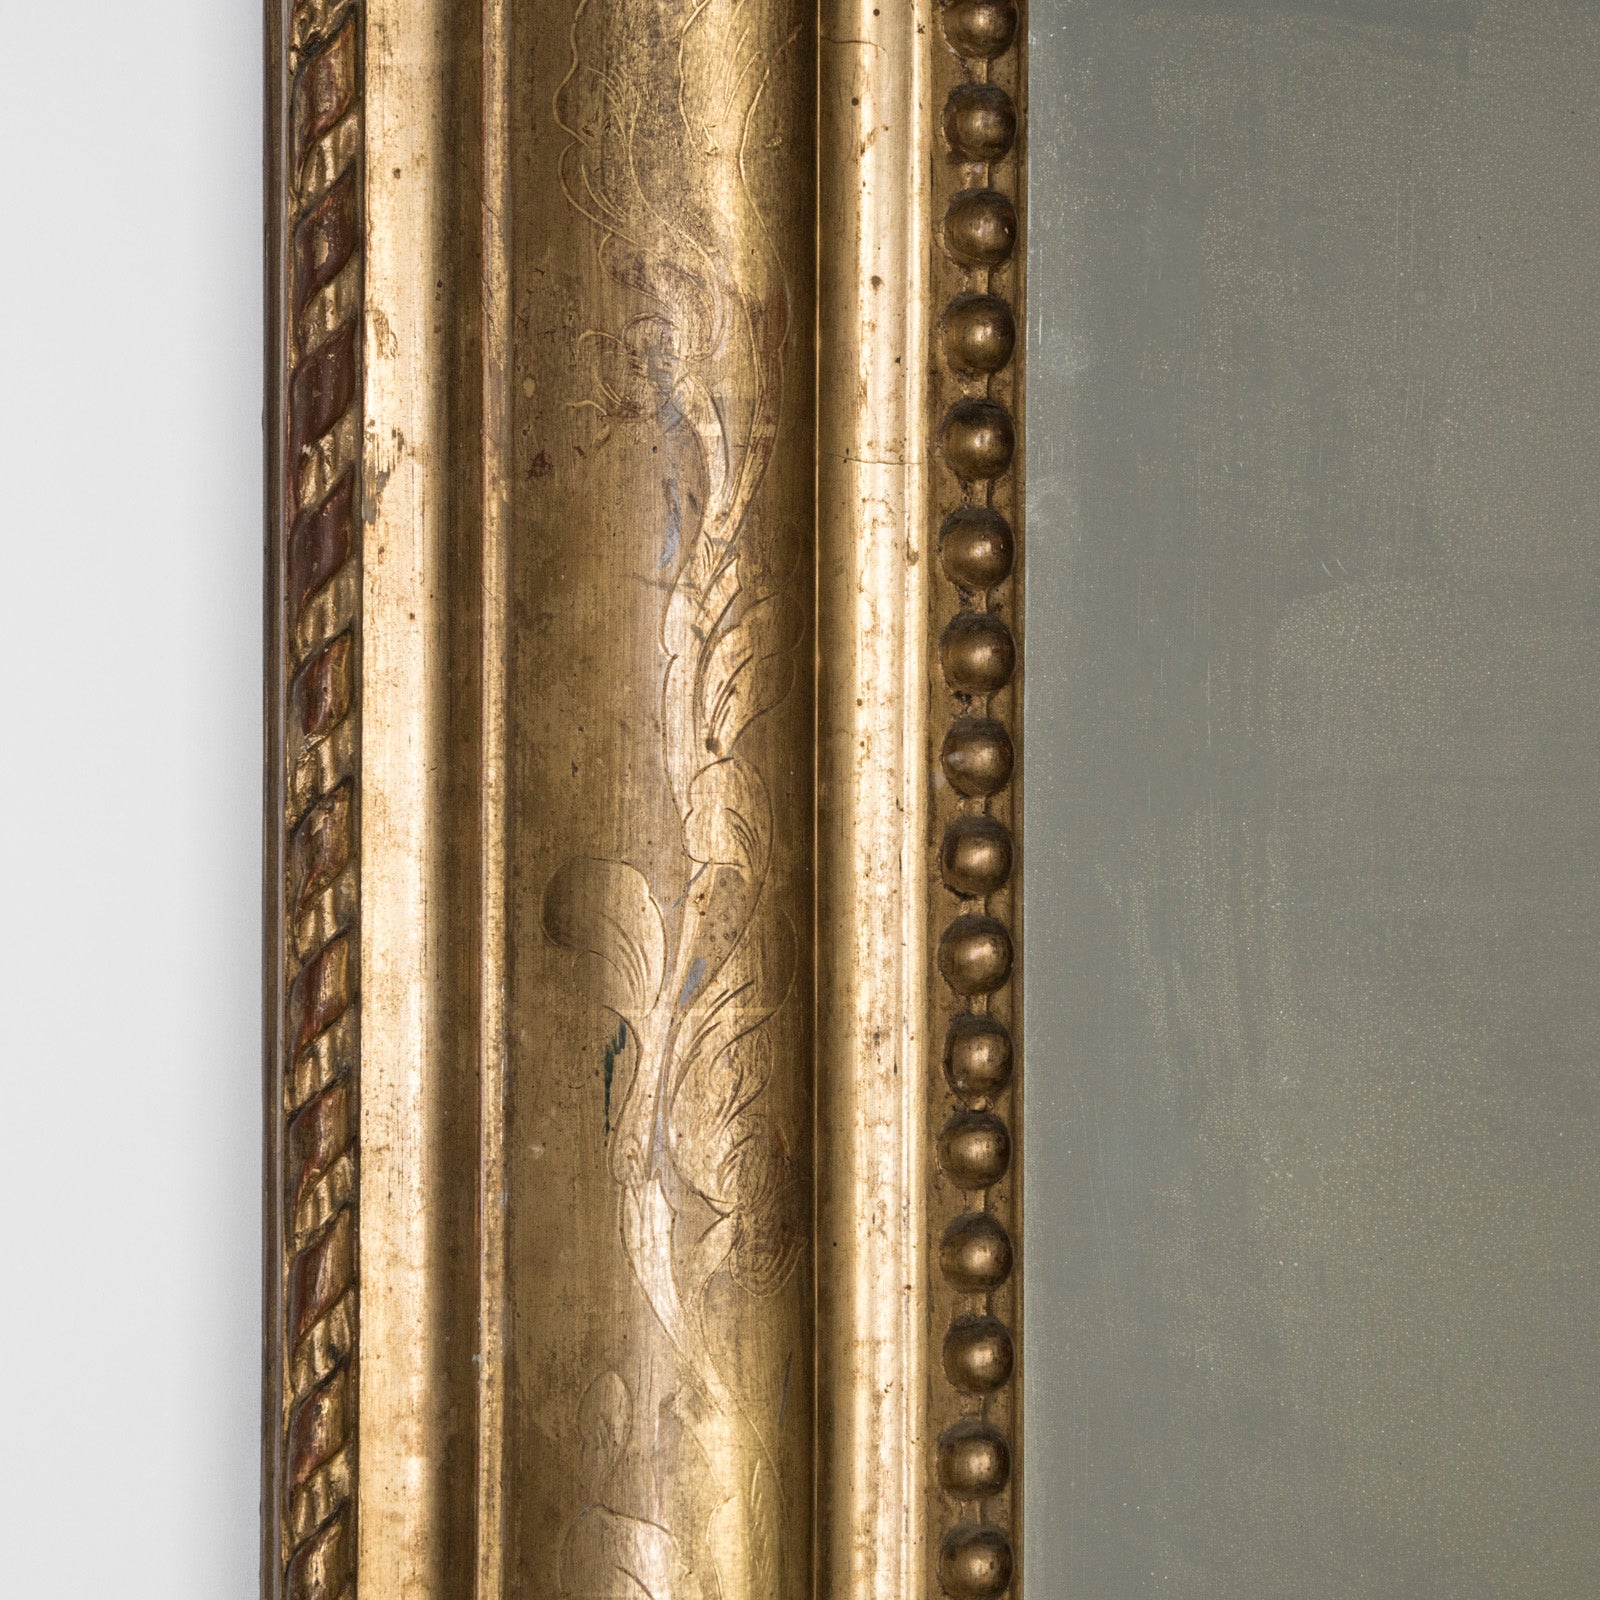 Large 19th C Gold Gilt Louis Philippe Mirror With Crest